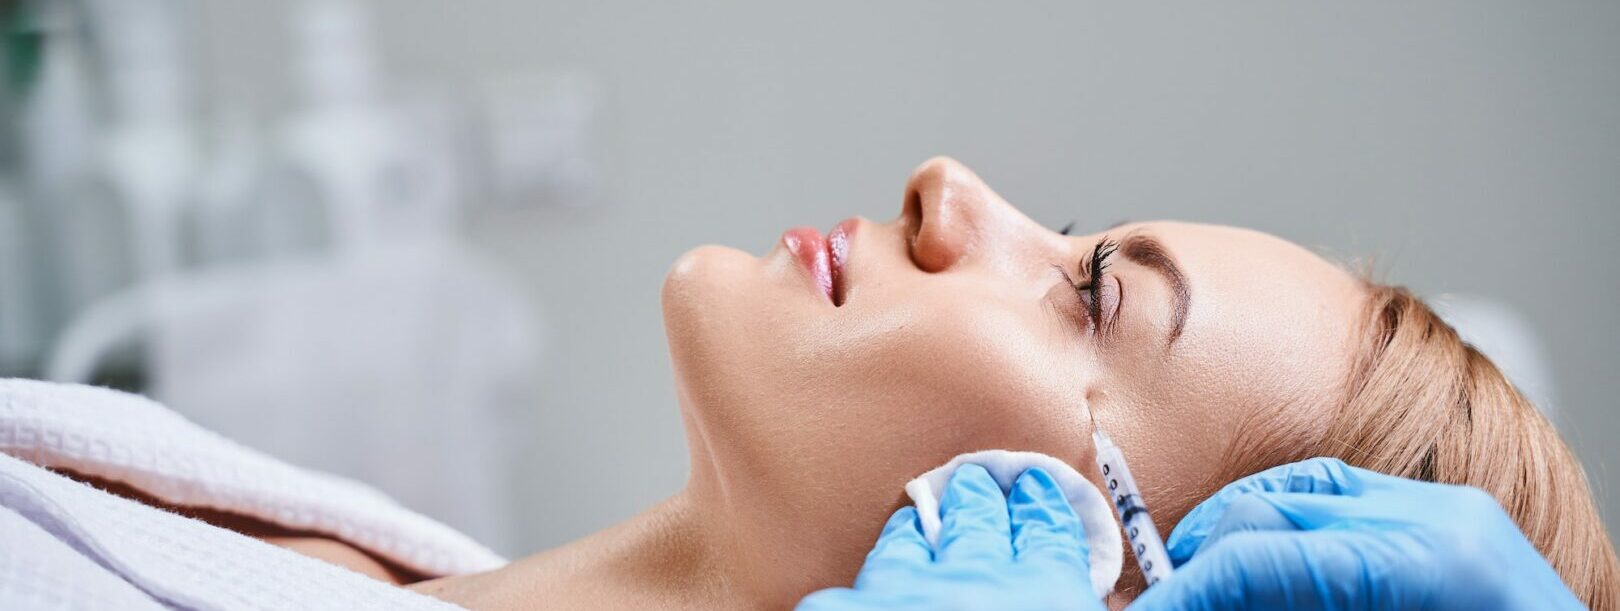 Female is receiving botox injections stock photo